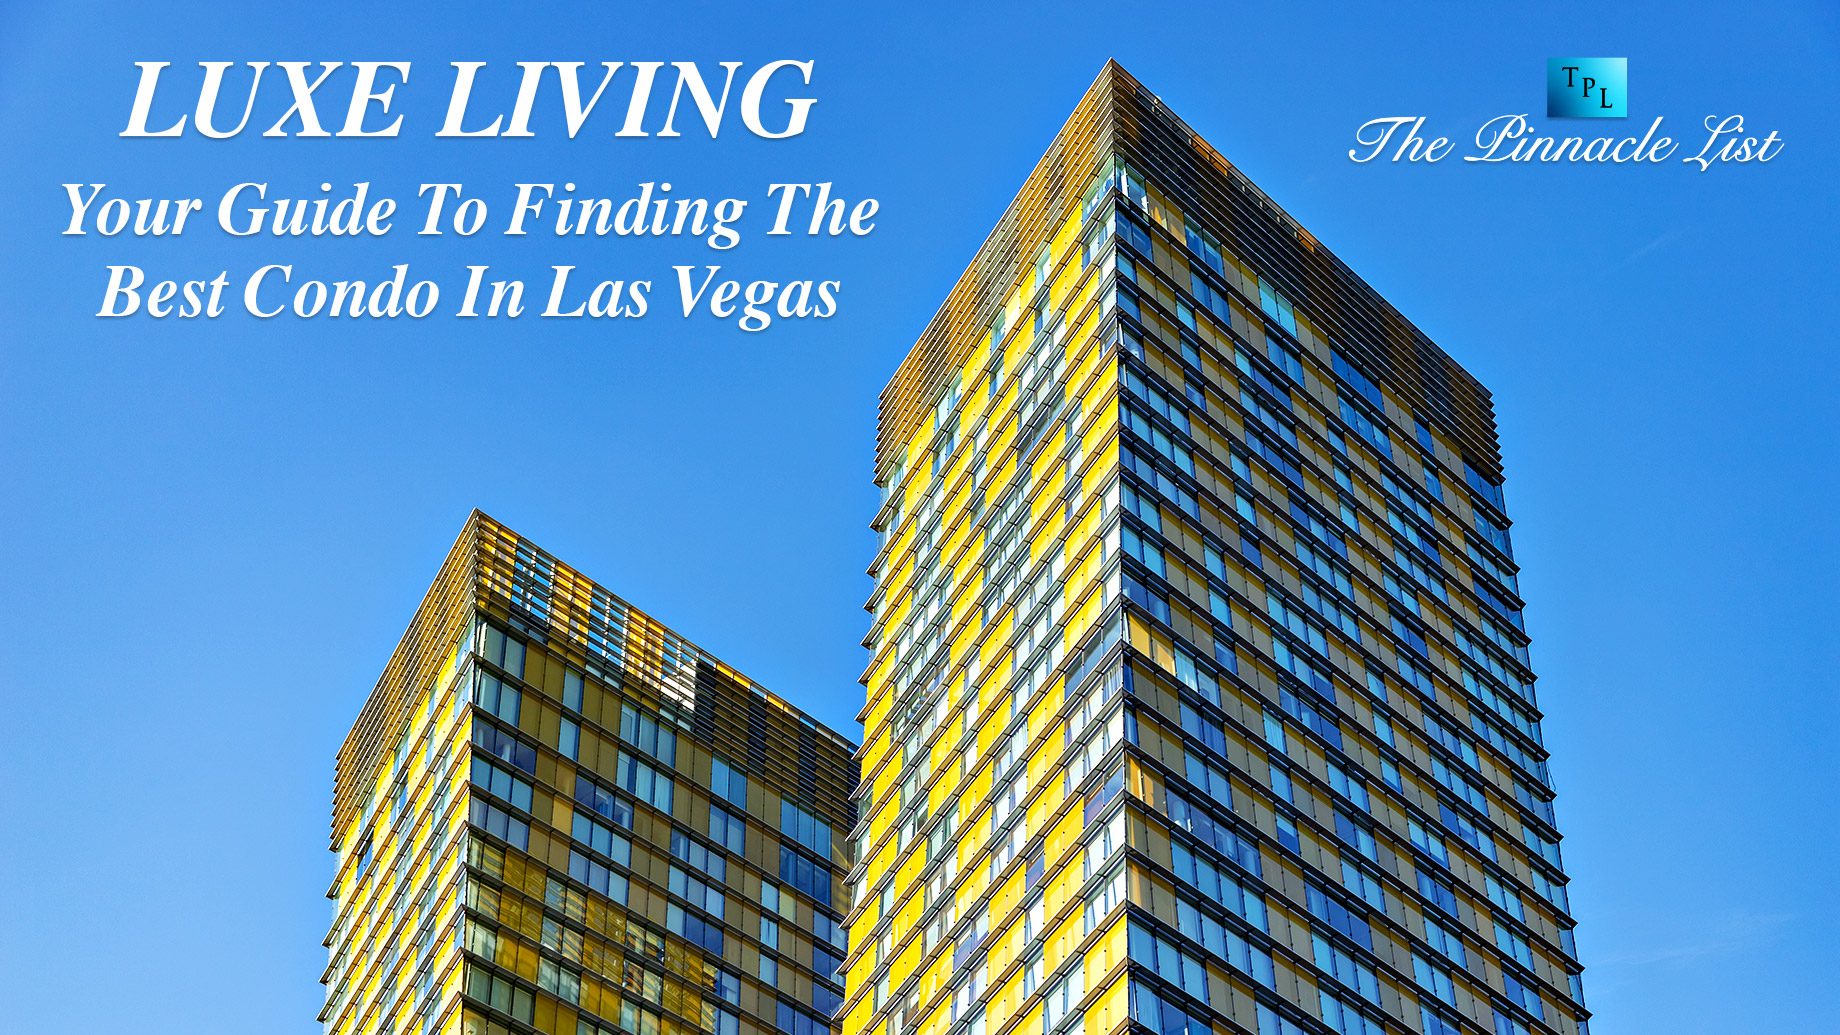 Luxe Living: Your Guide To Finding The Best Condo In Las Vegas